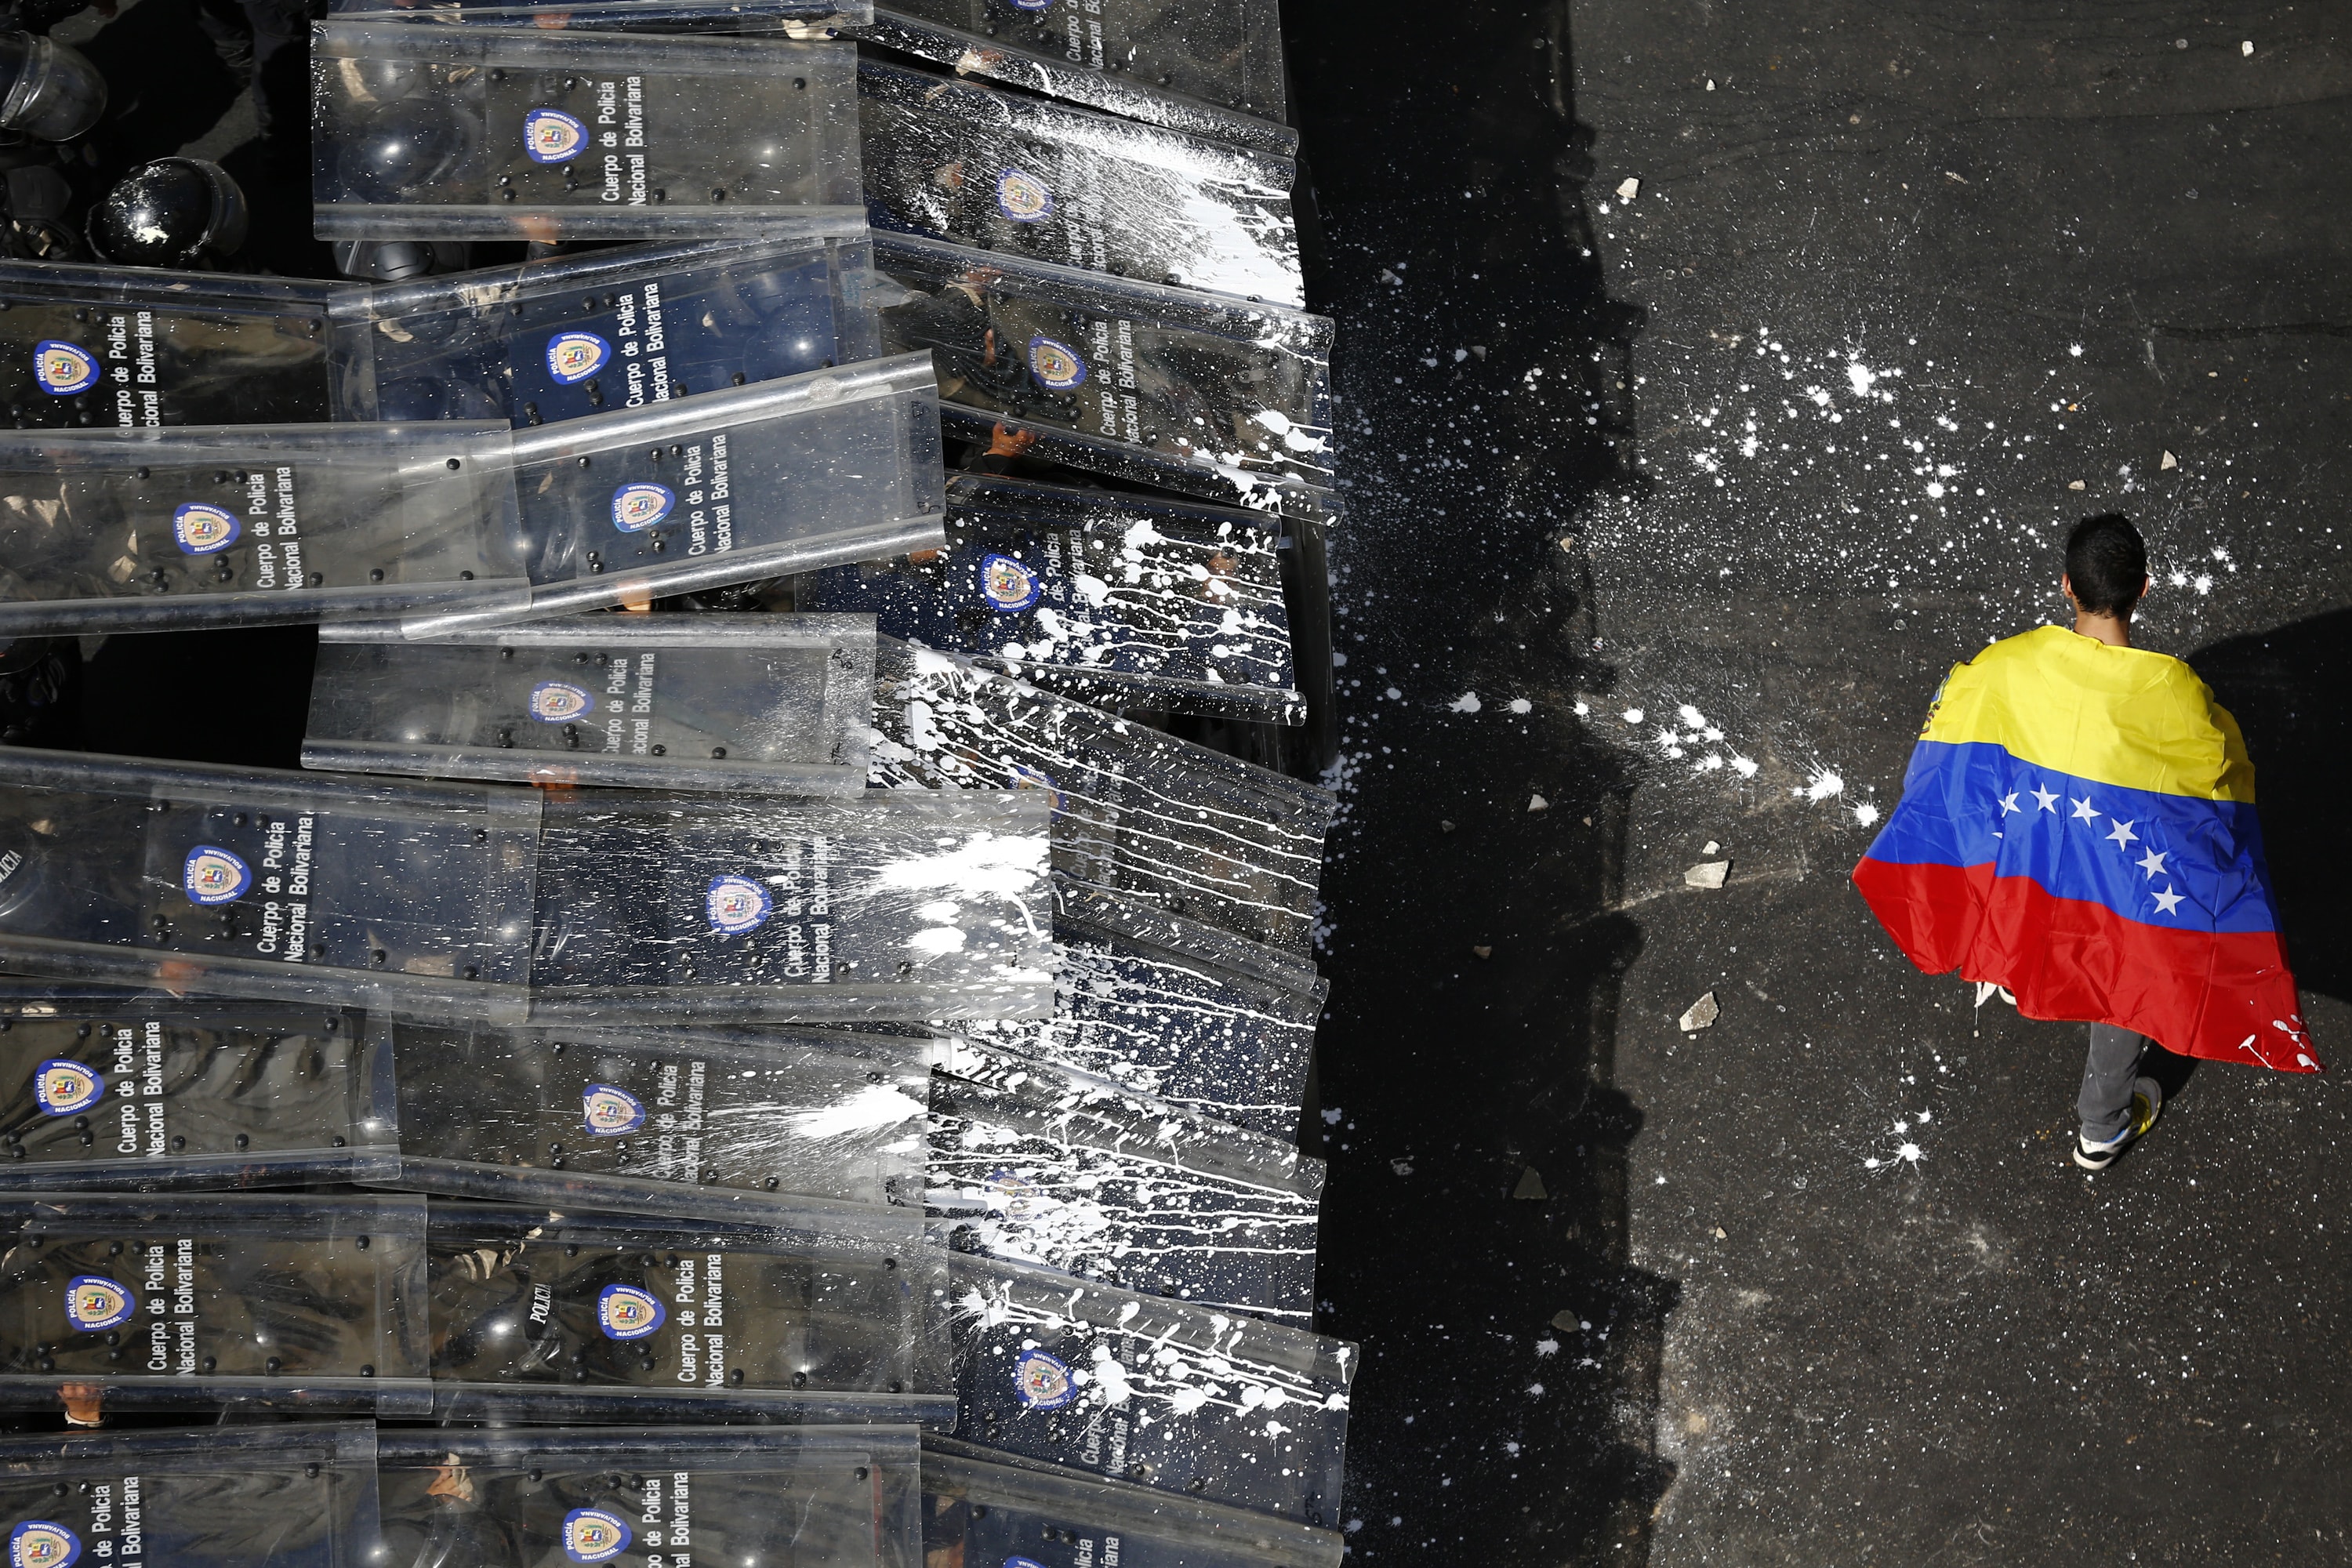 A demonstrator with a Venezuelan flag draped around himself protests against the government of President Nicolas Maduro, in front of a riot police line in Caracas 12 February 2014, REUTERS/Jorge Silva